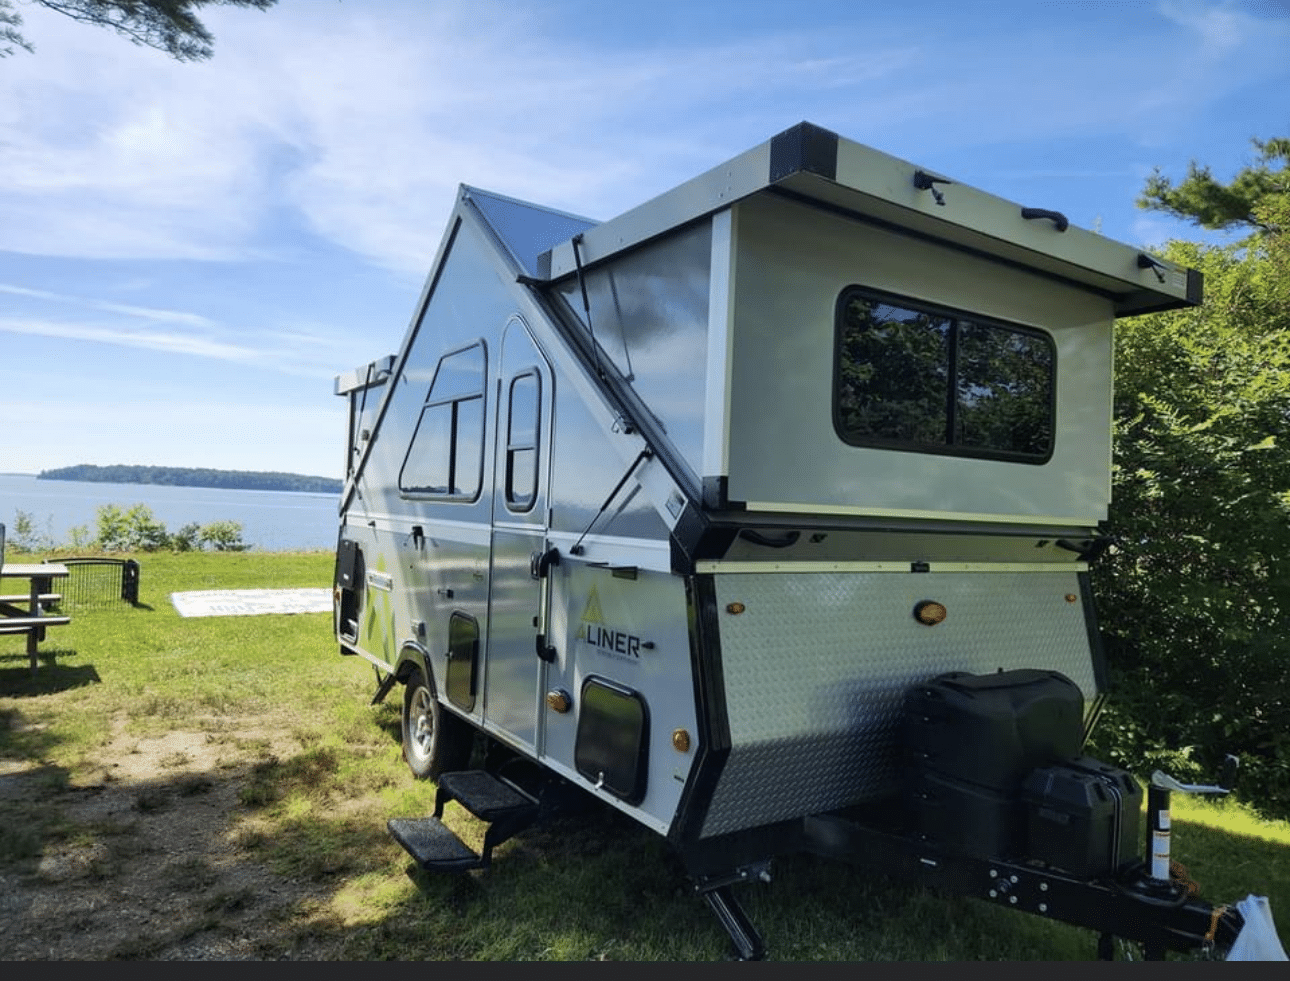 A camper trailer parked on the grass near water.